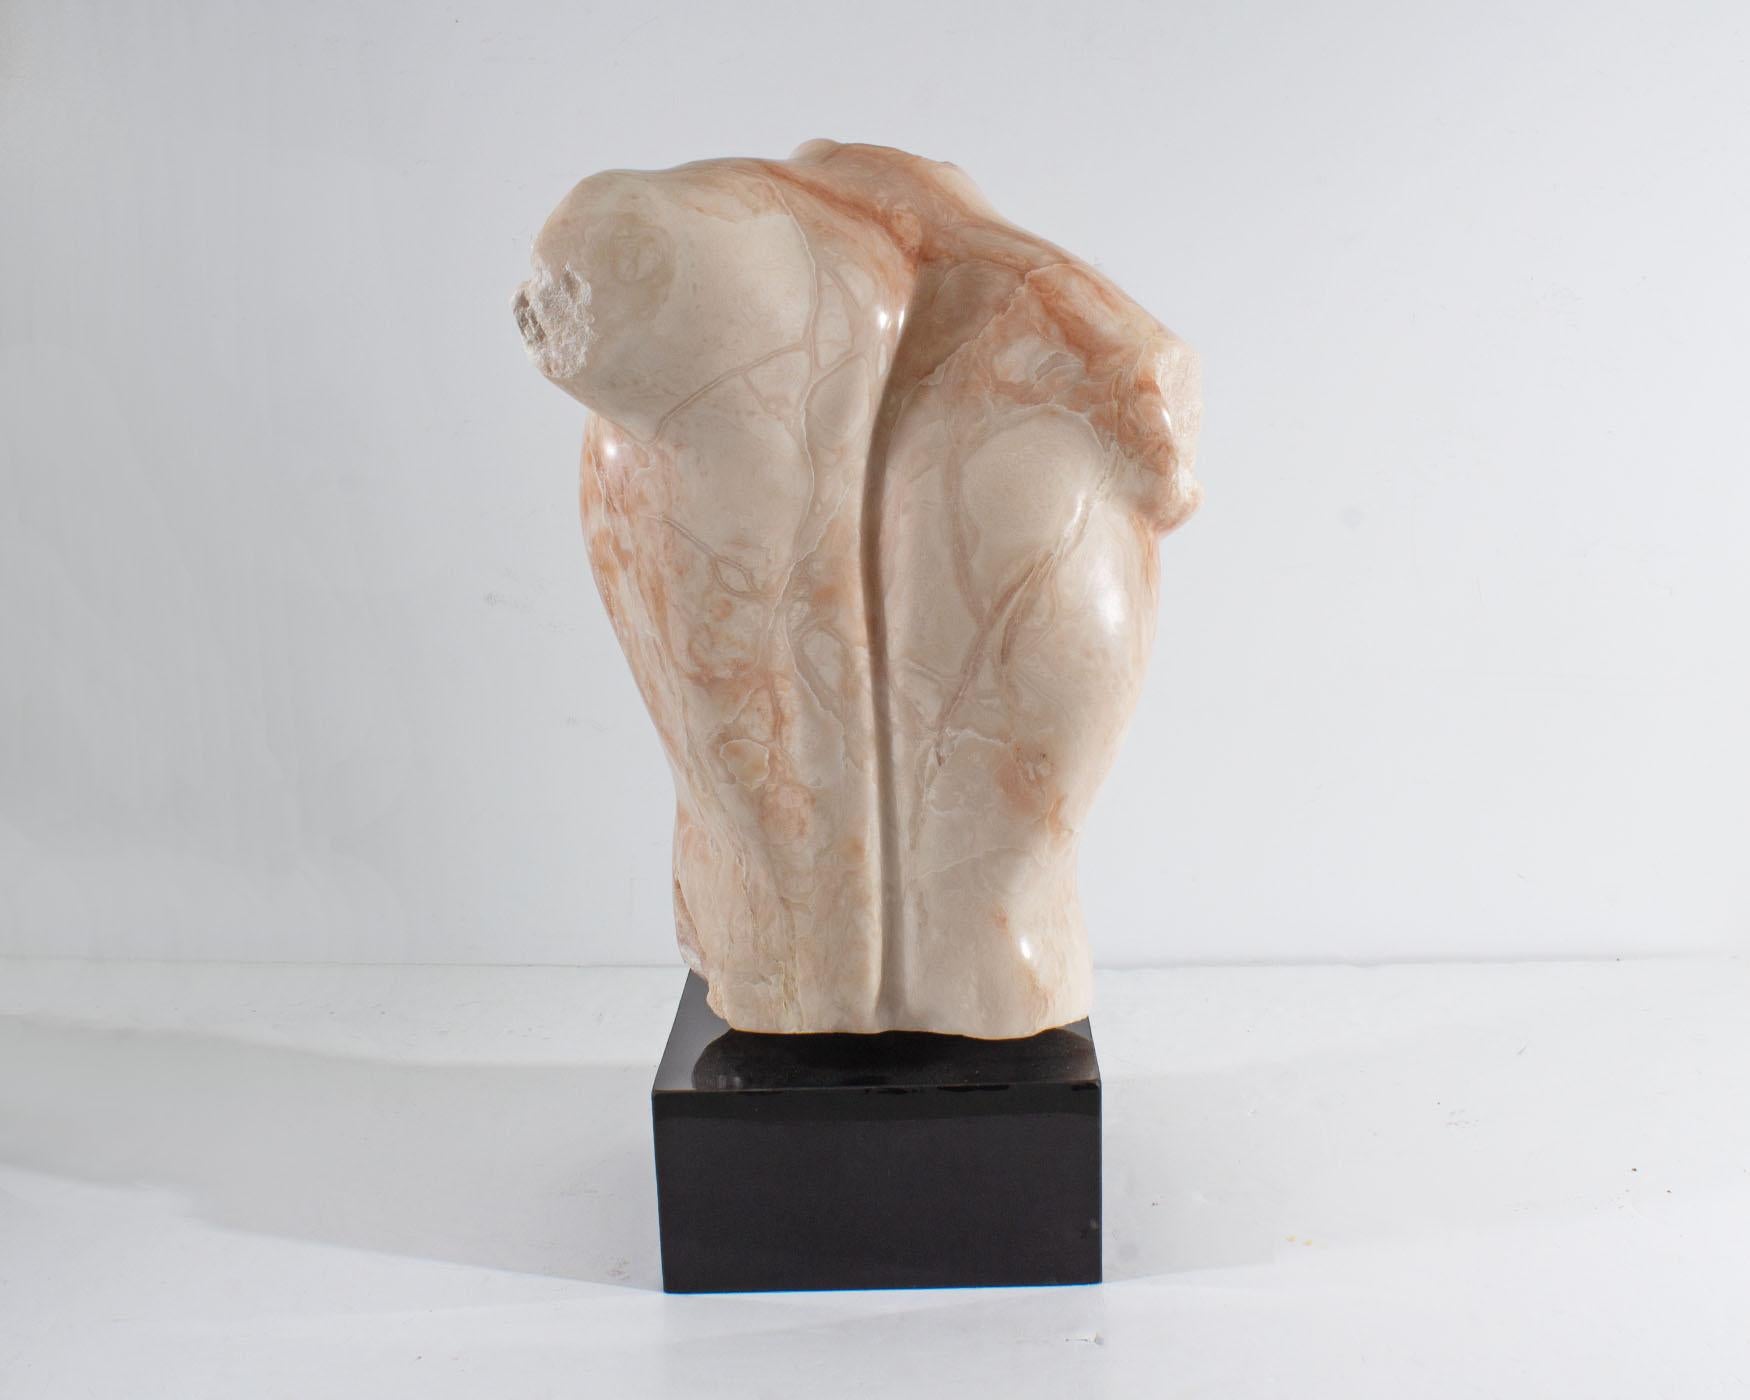 Hand-Carved Bryan Ross Signed Stone Sculpture of a Torso 